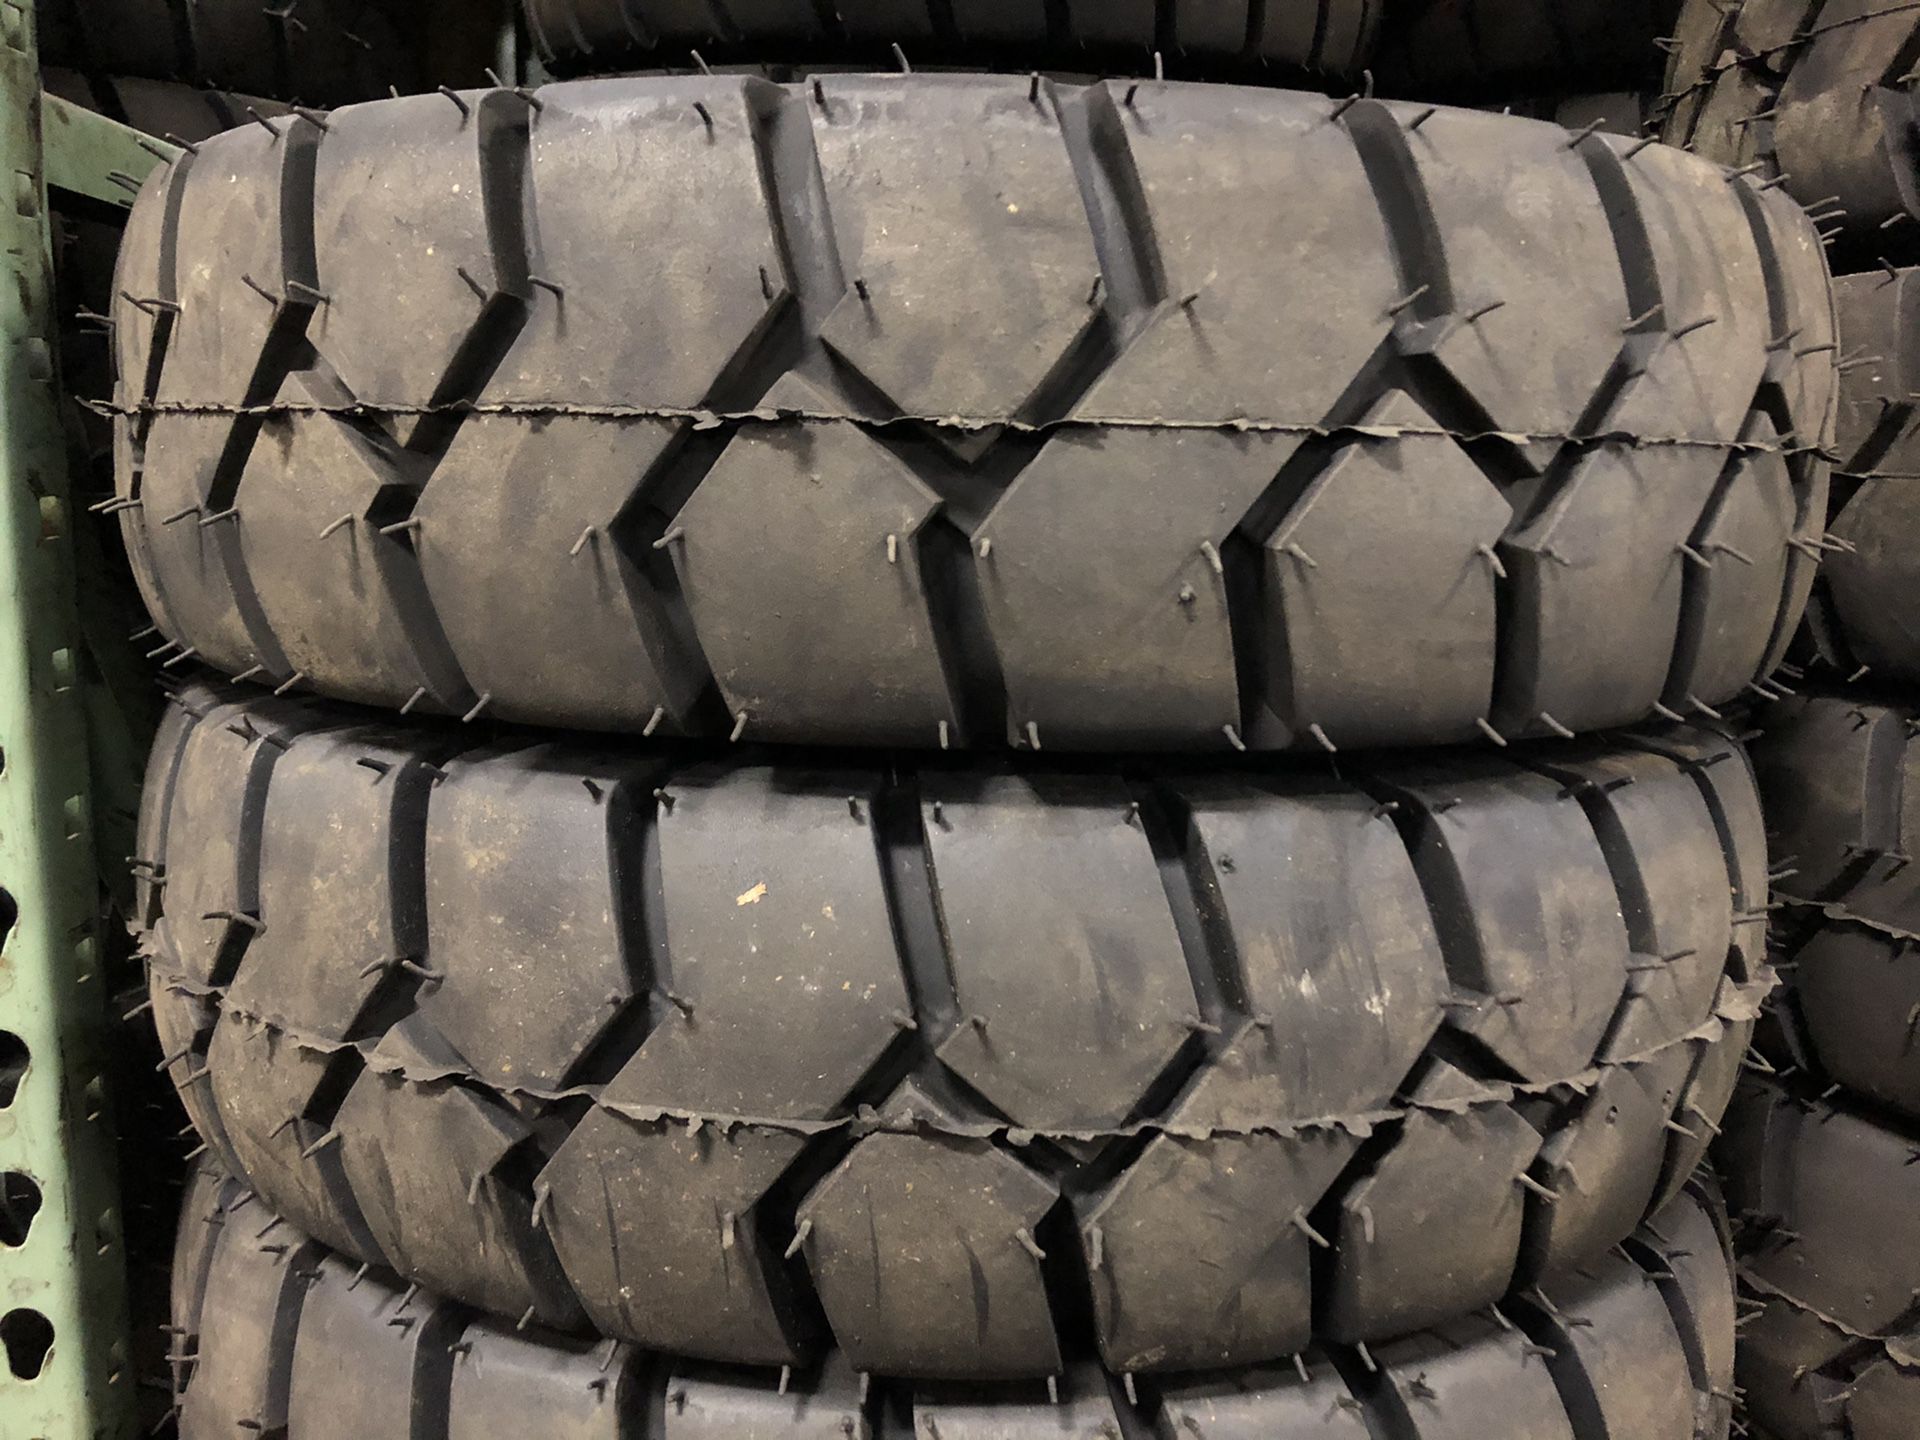 Pair of 700x12 forklift tires $150